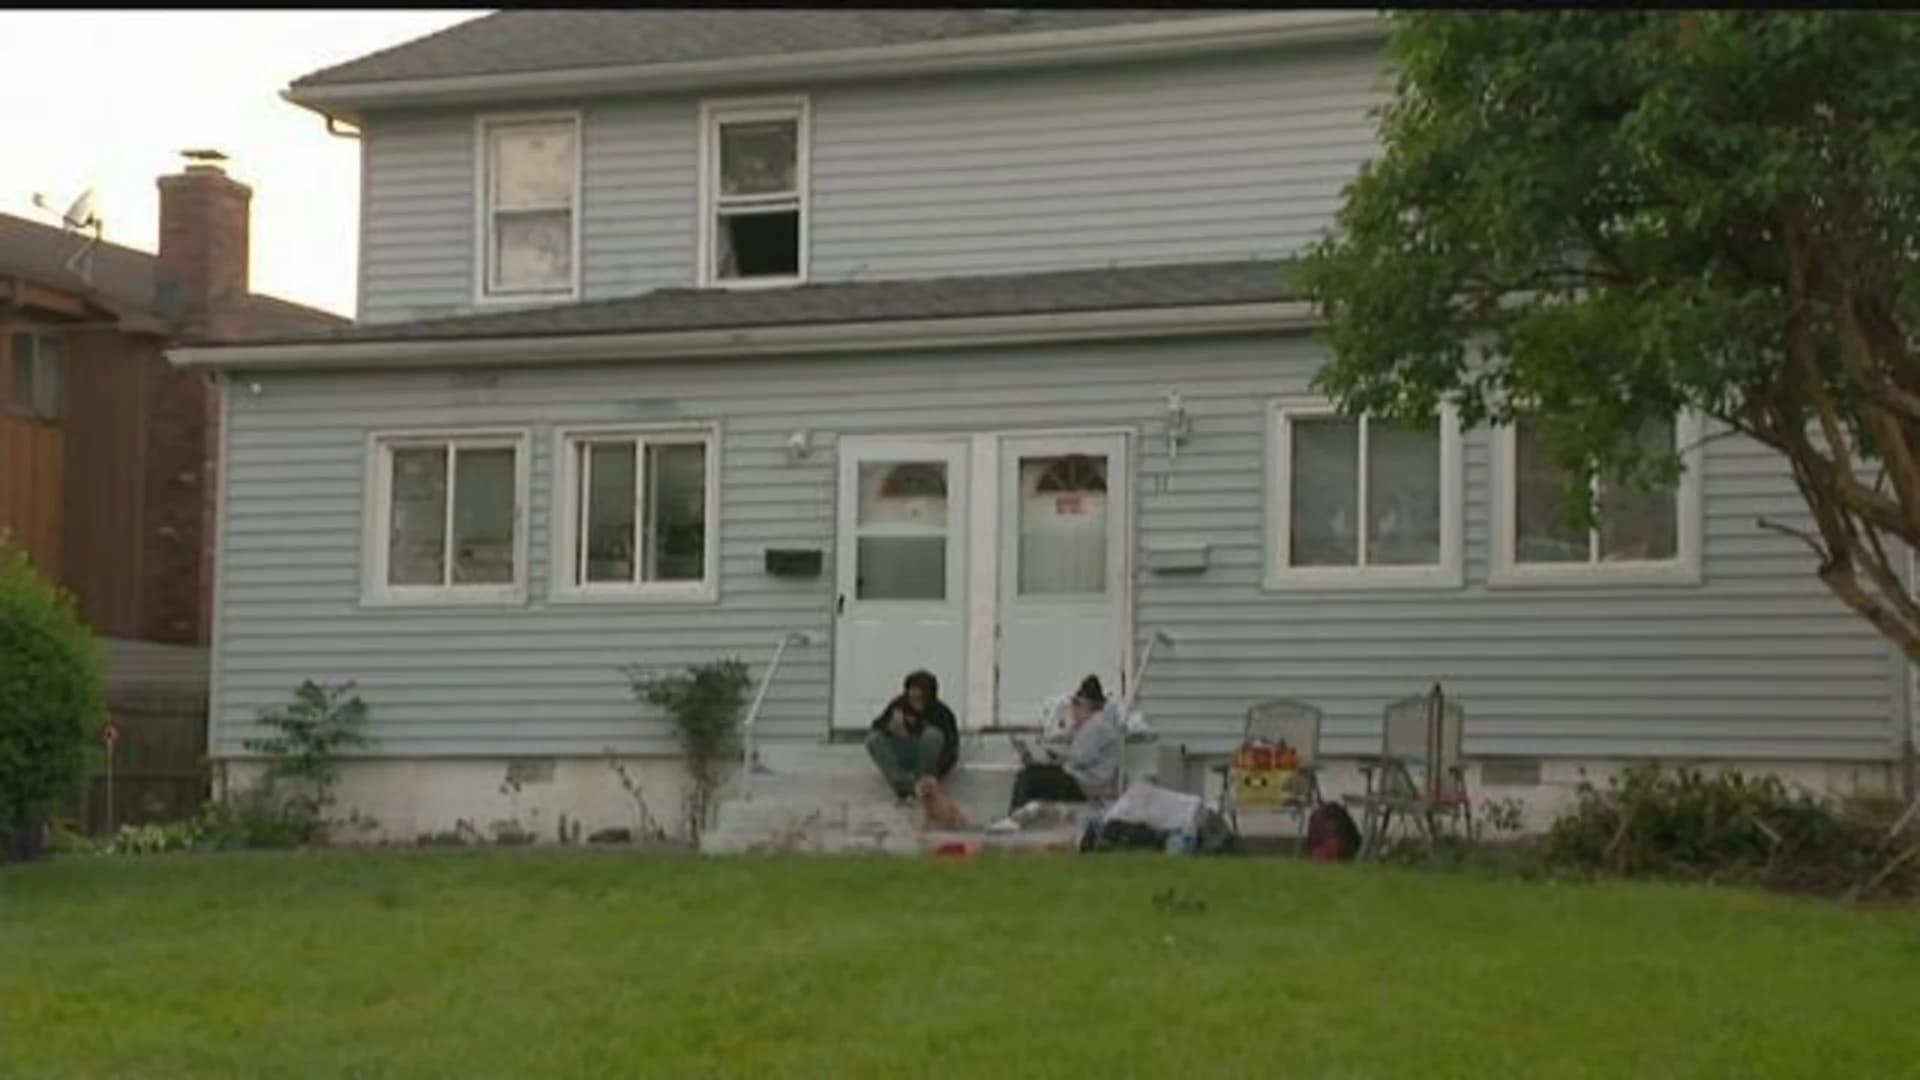 Fire breaks out at 2-family house in Stamford; man hospitalized